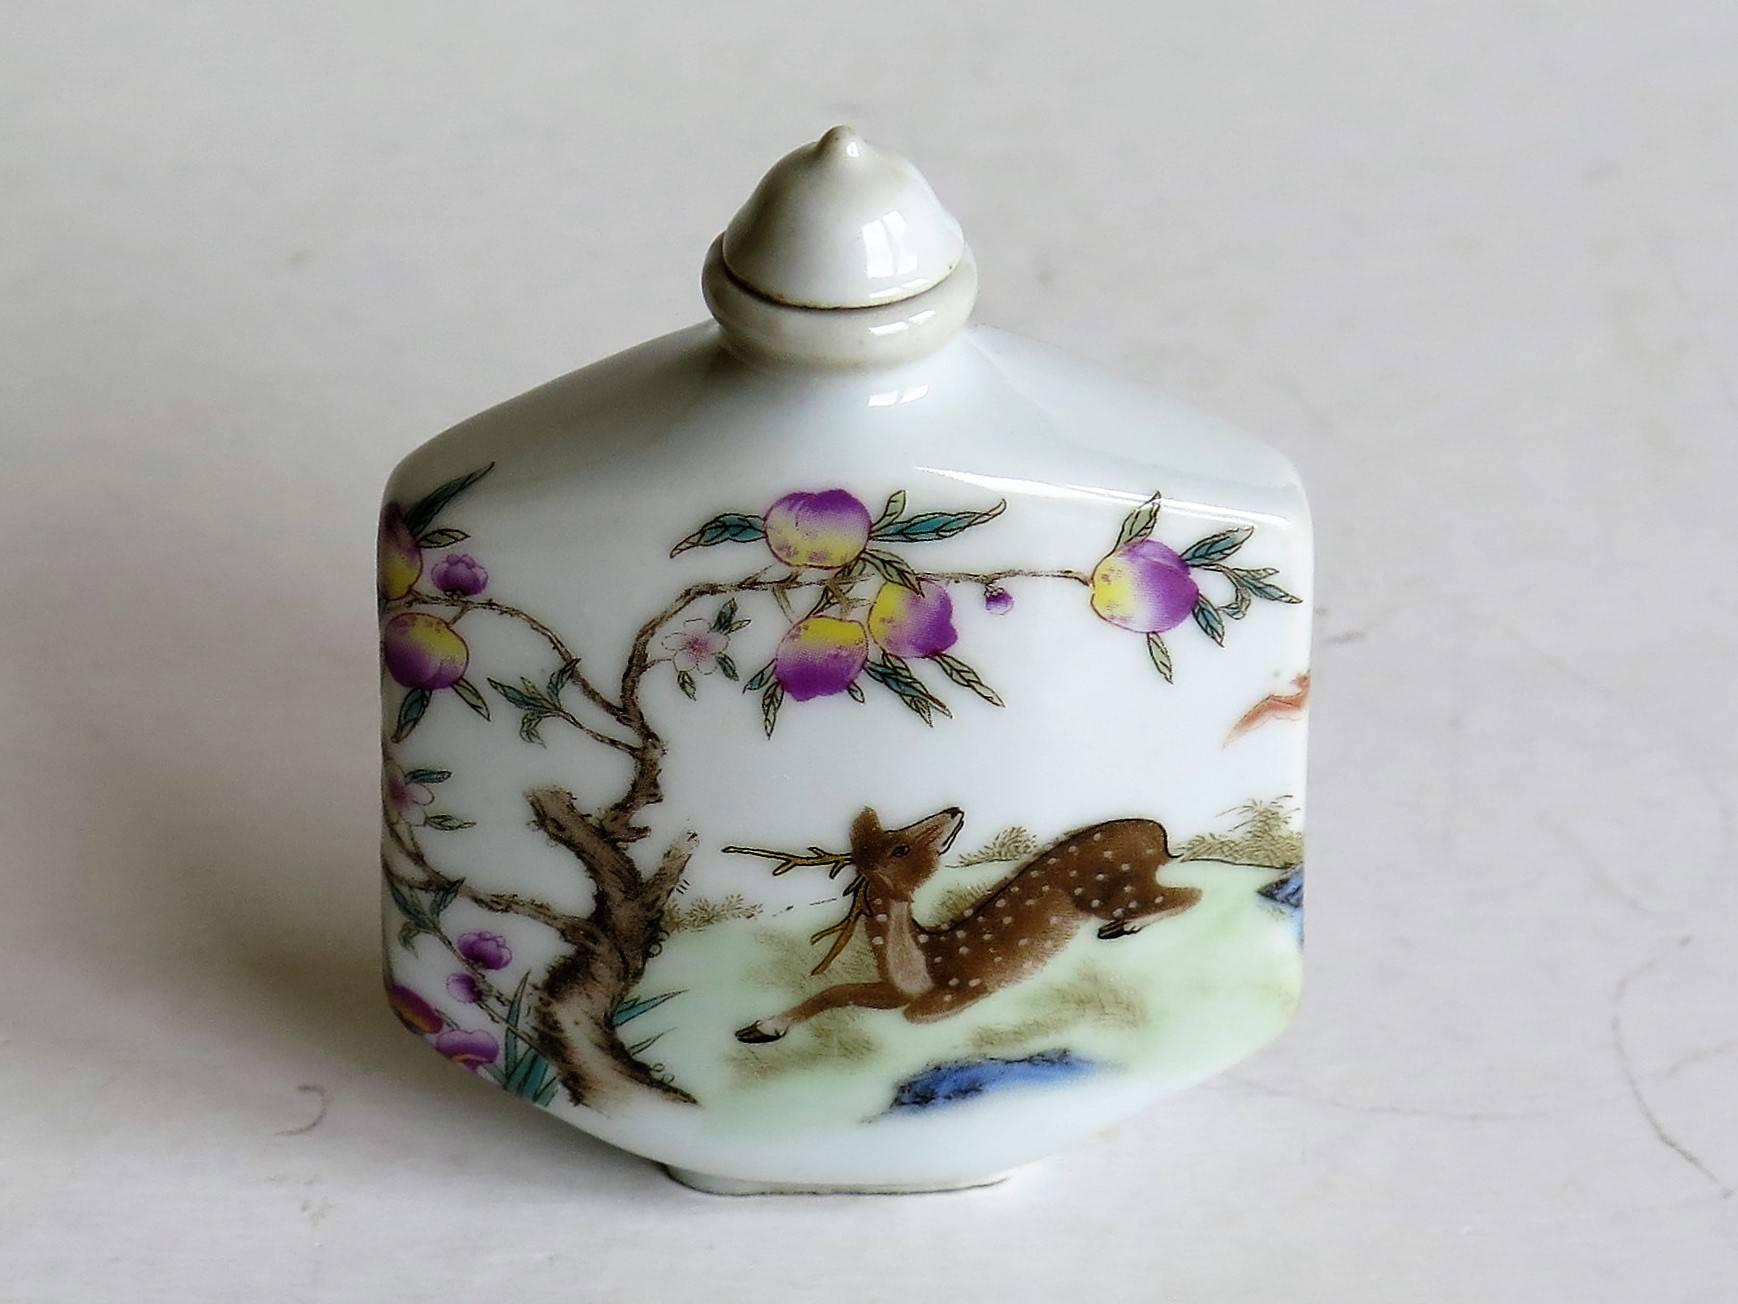 This is a very decorative, hand-painted, Chinese Export, porcelain snuff bottle, circa 1940s. 

The bottle has a low shaped foot and a nice tactile rectangular shape which curves to the front and back faces. It has a narrow neck with a cone shaped